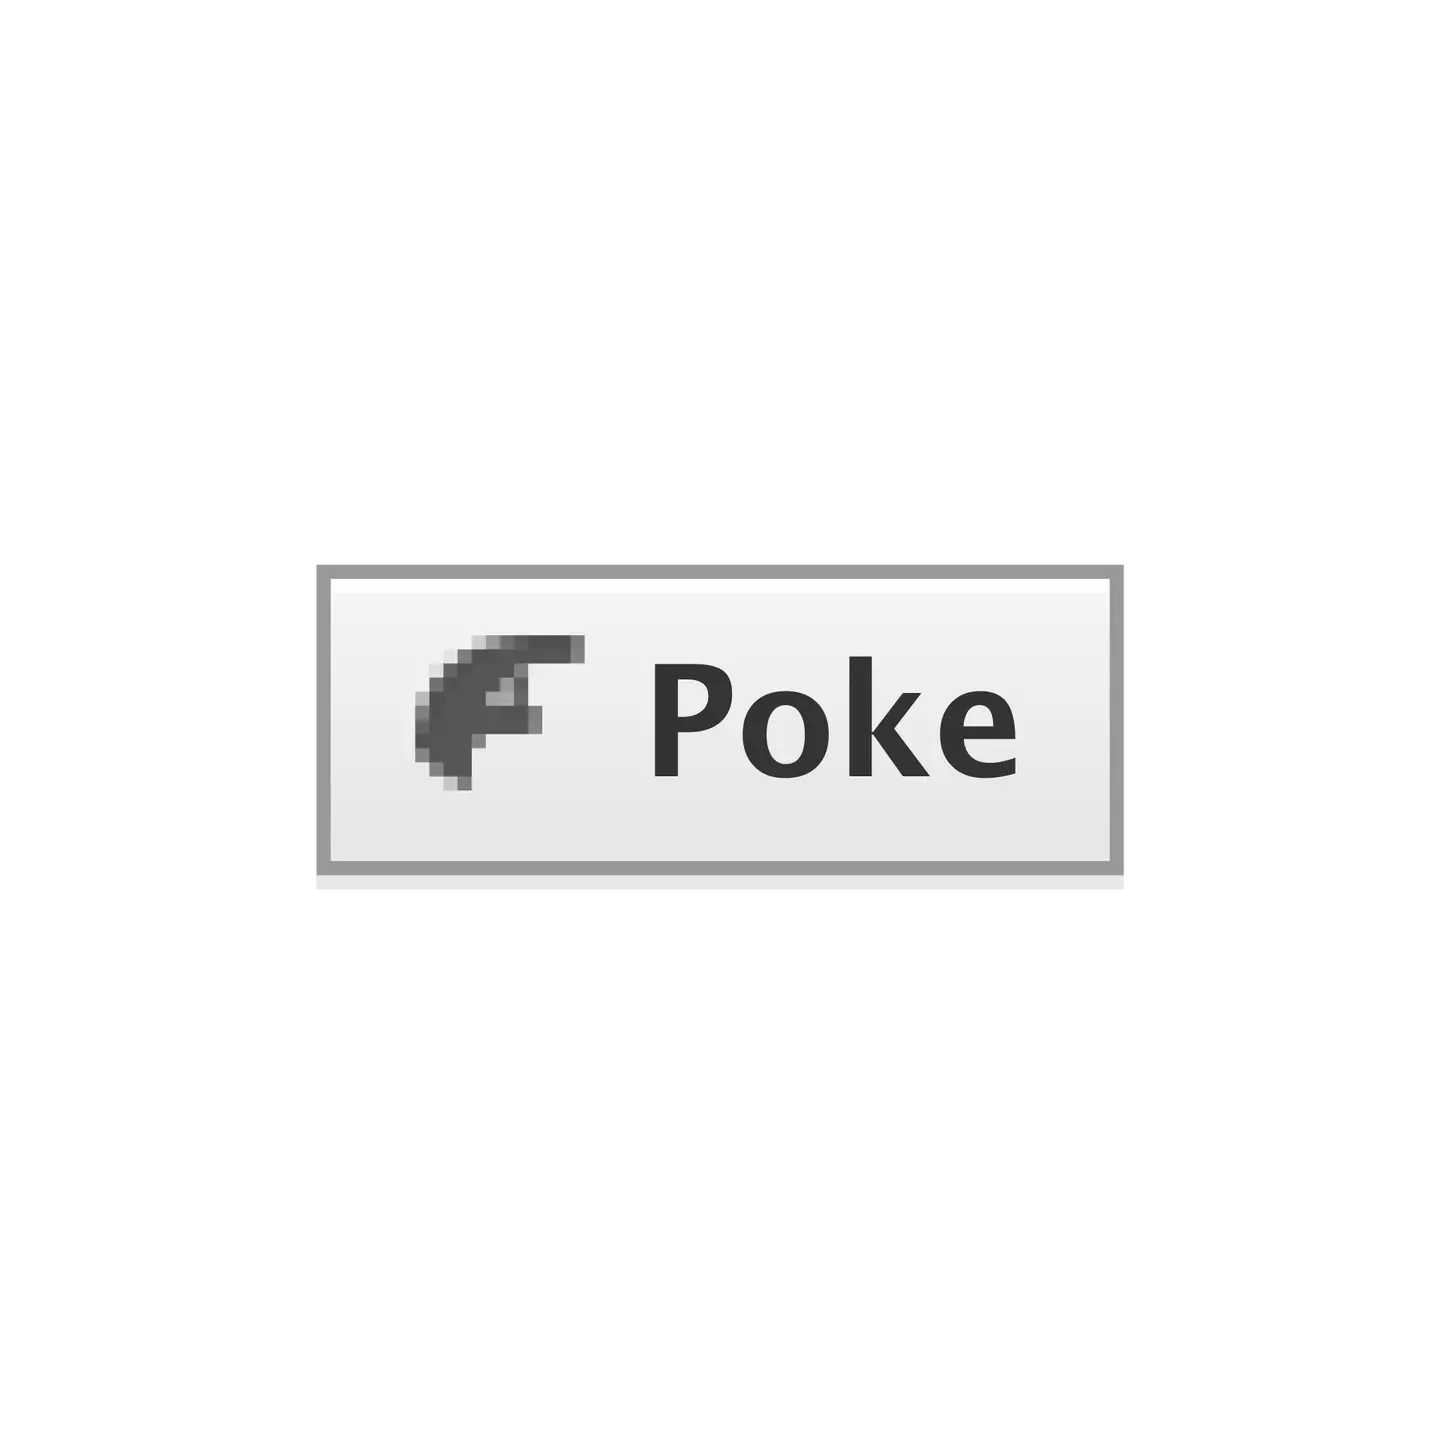 Maybe Facebook can bring back the 'Poke' in celebration?